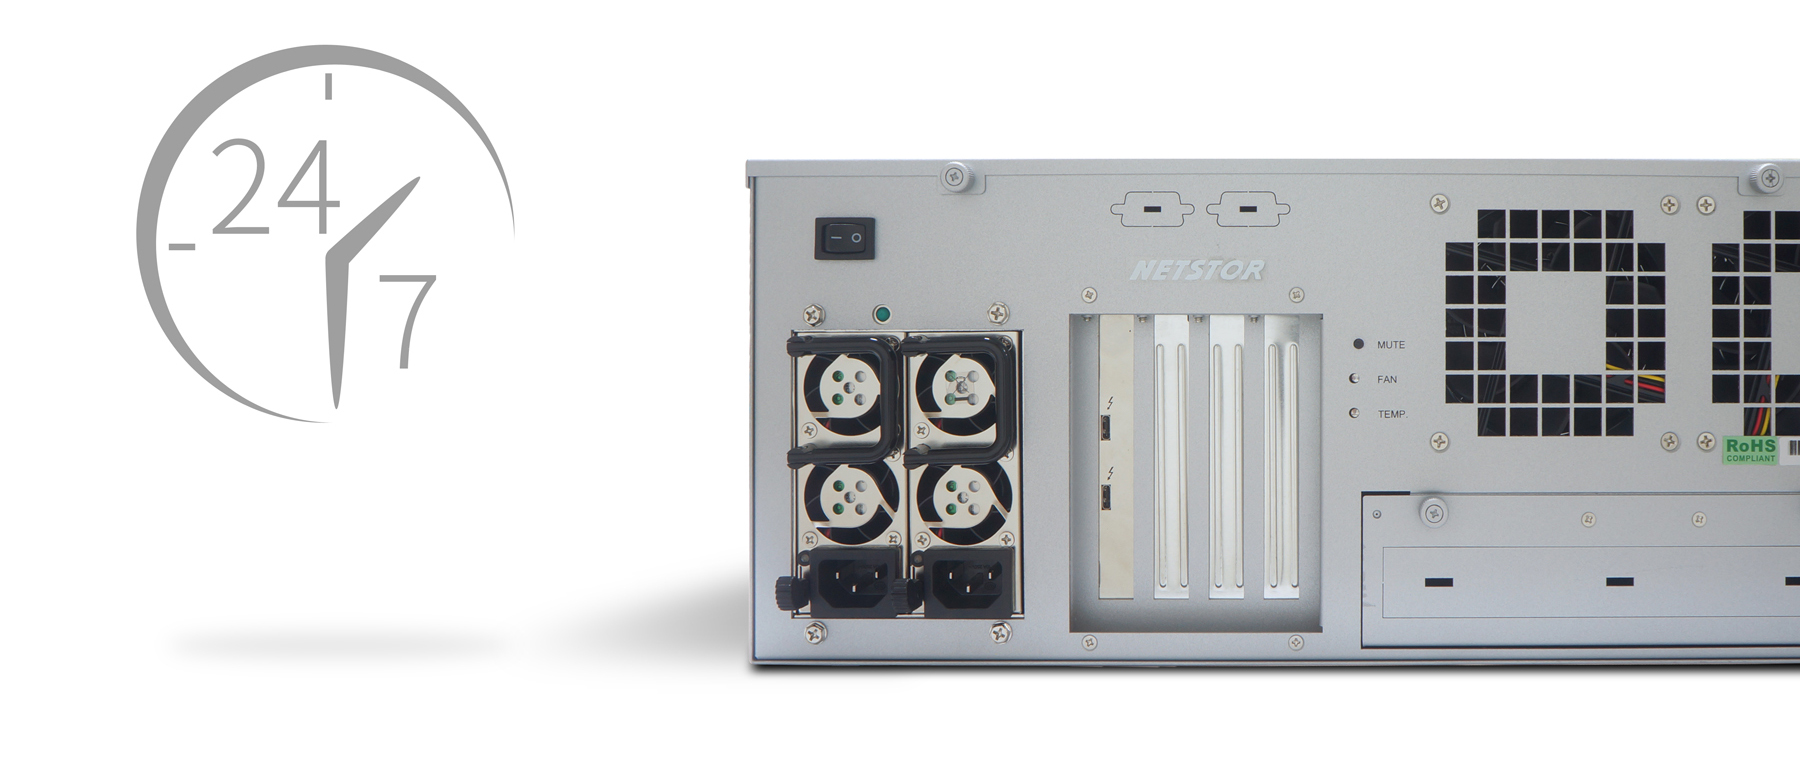 NA381TB3 will run 24/7 with no system downtime since the built-in server-grade 650W redundant PSU